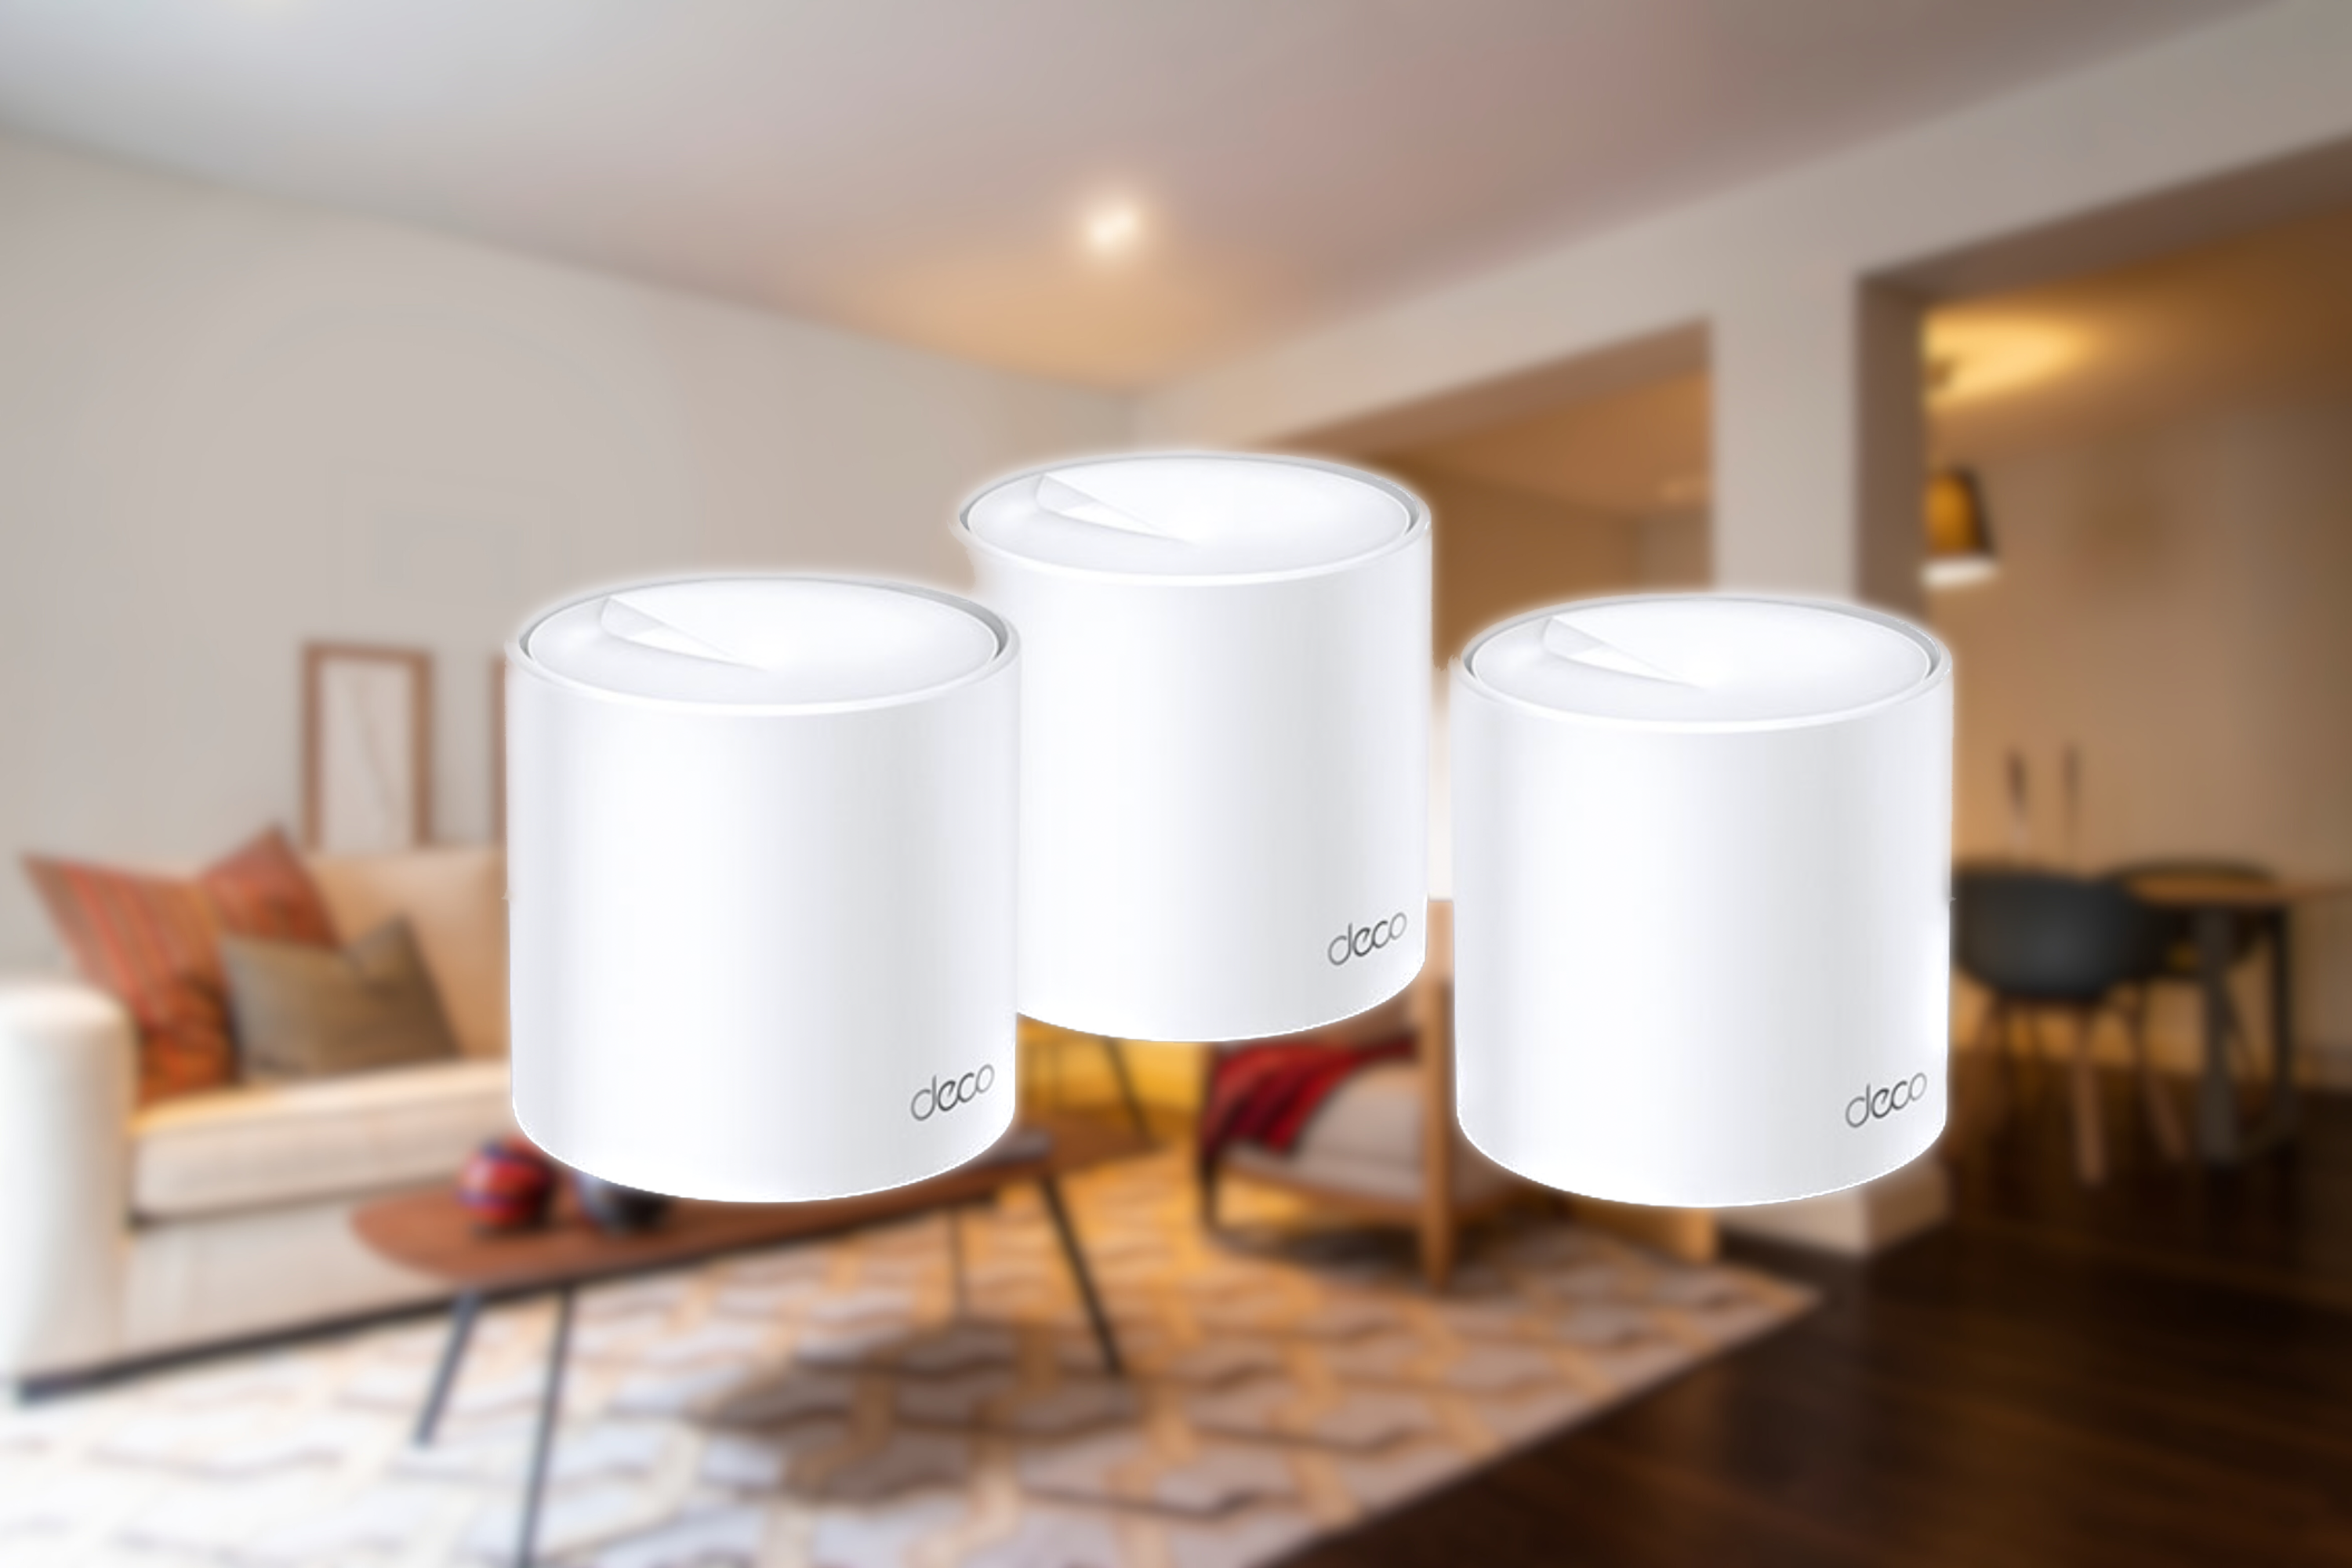 TP-Link Deco WiFi 6 Mesh System(Deco X20) in front of living room